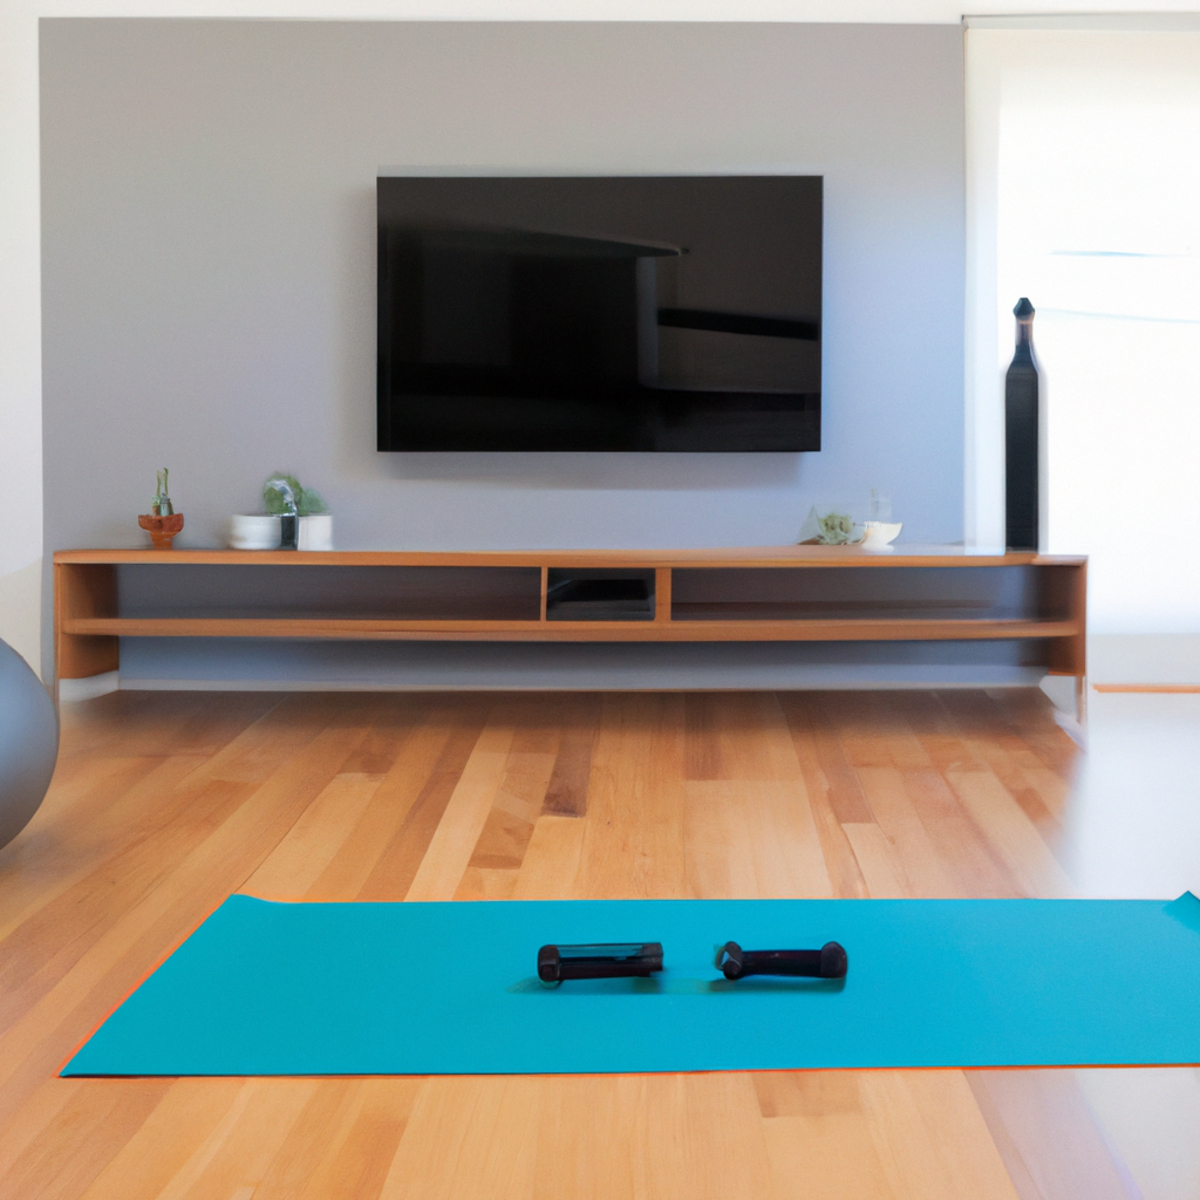 The photo shows a sleek and modern living room with a large flat-screen TV mounted on the wall. In front of the TV, there is a yoga mat with a set of weights and a resistance band neatly arranged on top. On the coffee table, there is a laptop and a water bottle, indicating that the person is ready to start their virtual fitness class. The room is filled with natural light, creating a calming and inviting atmosphere. The photo perfectly captures the convenience and accessibility of virtual fitness classes, allowing individuals to stay active and healthy despite their busy schedules.